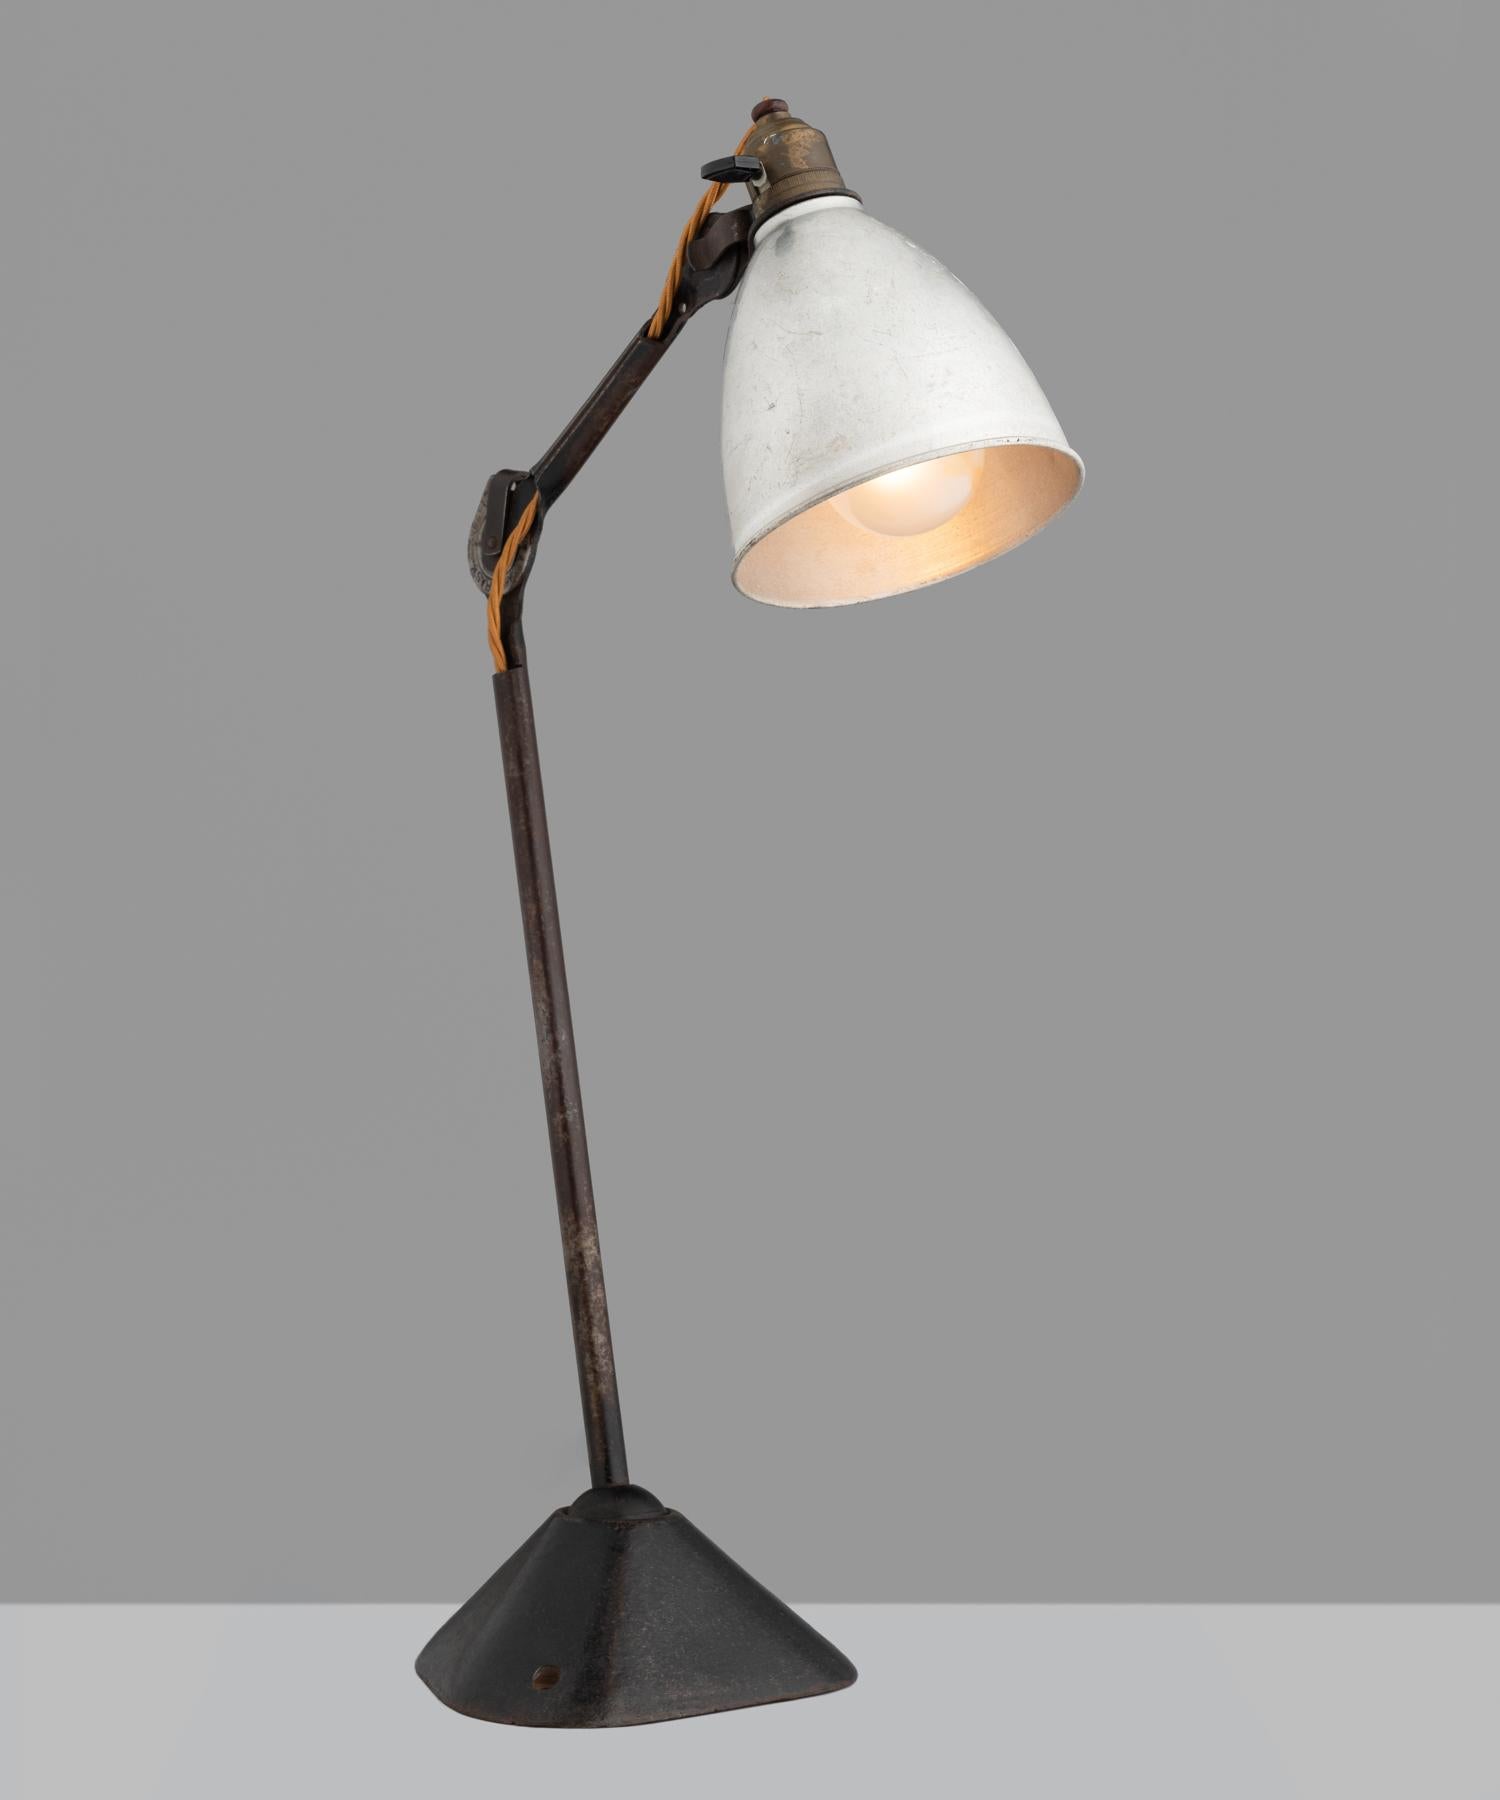 Gras desk lamp, France, circa 1930.

Iconic design by Bernard-Albin Gras features an aluminum shade, cast steel frame with three points of adjustment. Measurement from configuration shown in cover image.

Measures: 7